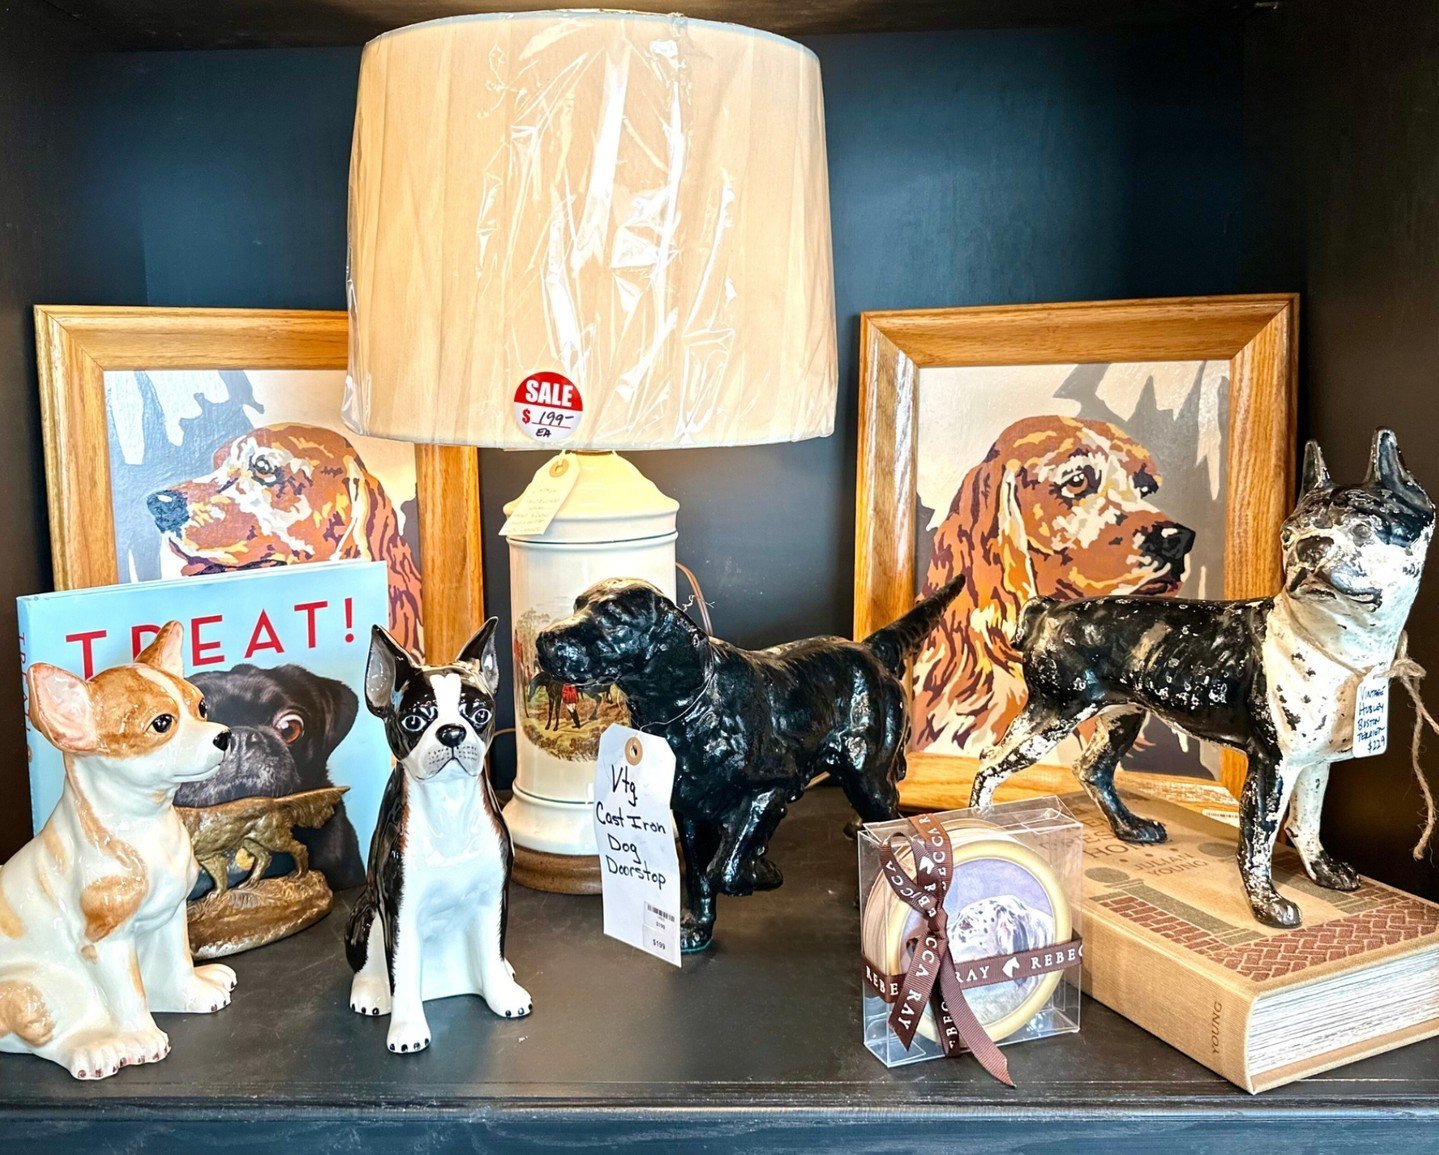 Mother&rsquo;s Day is less than 2 weeks away! Is mom a dog person? These cute items&mdash;from door stops to coffee table books&mdash;make great gifts!